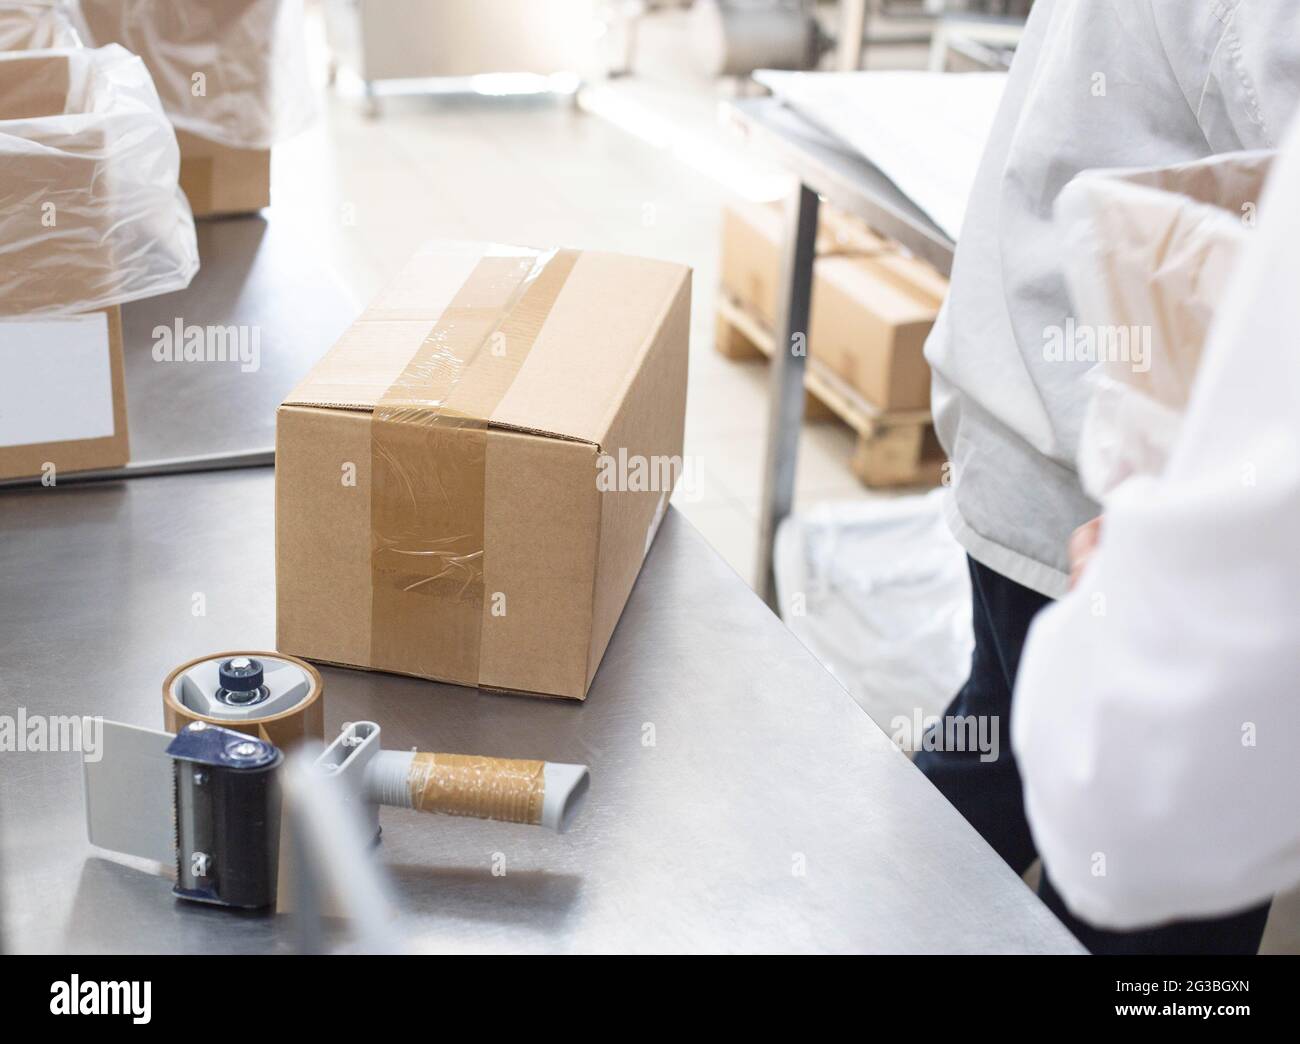 Worker packs cardboard boxes with finished goods at the factory. Stock Photo